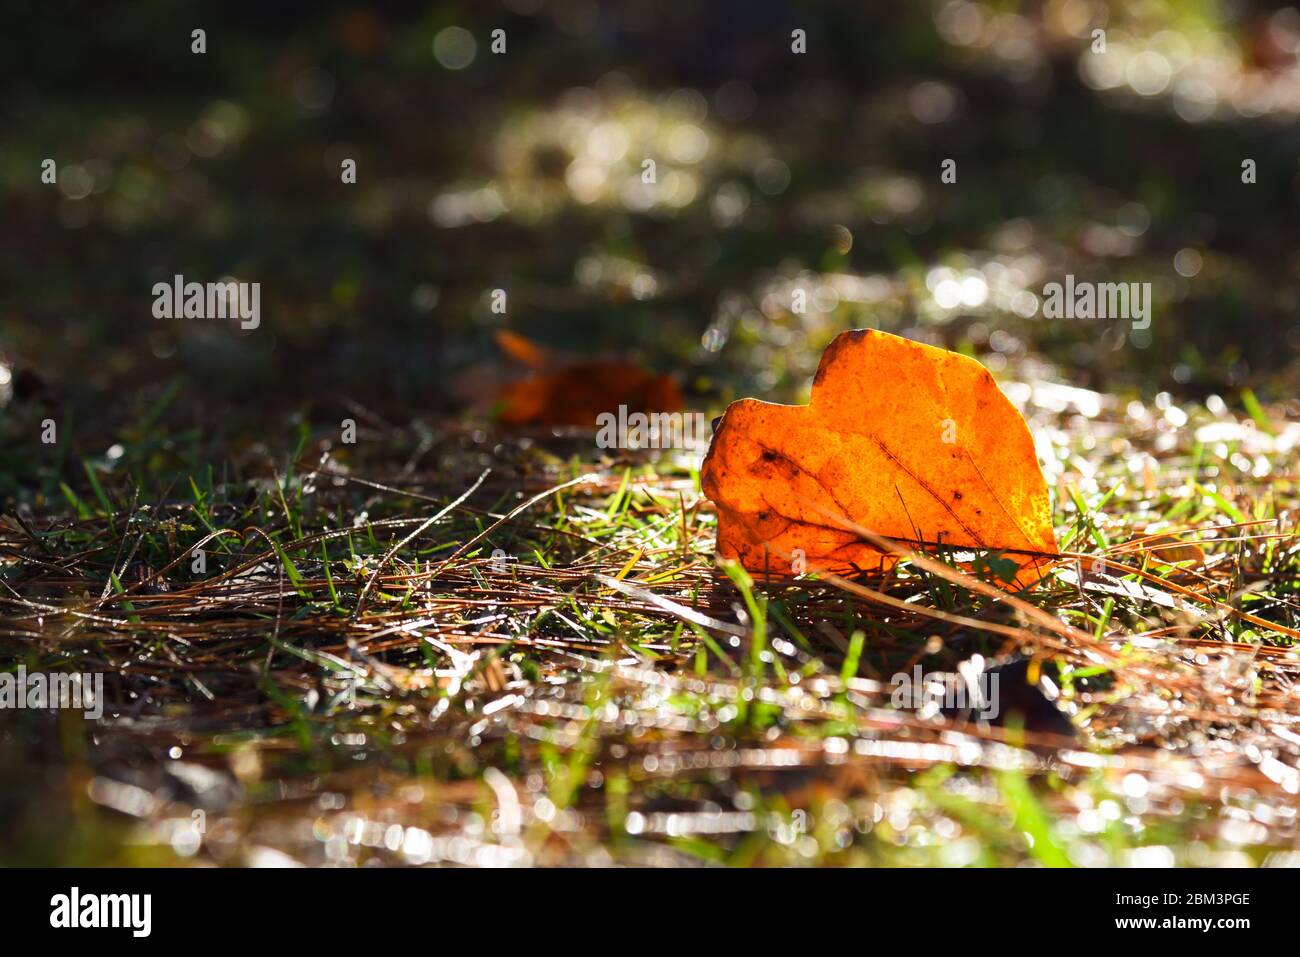 Orange leaf fallen to ground covered in pine needles in autumn. Backlit by late afternoon sun. Stock Photo